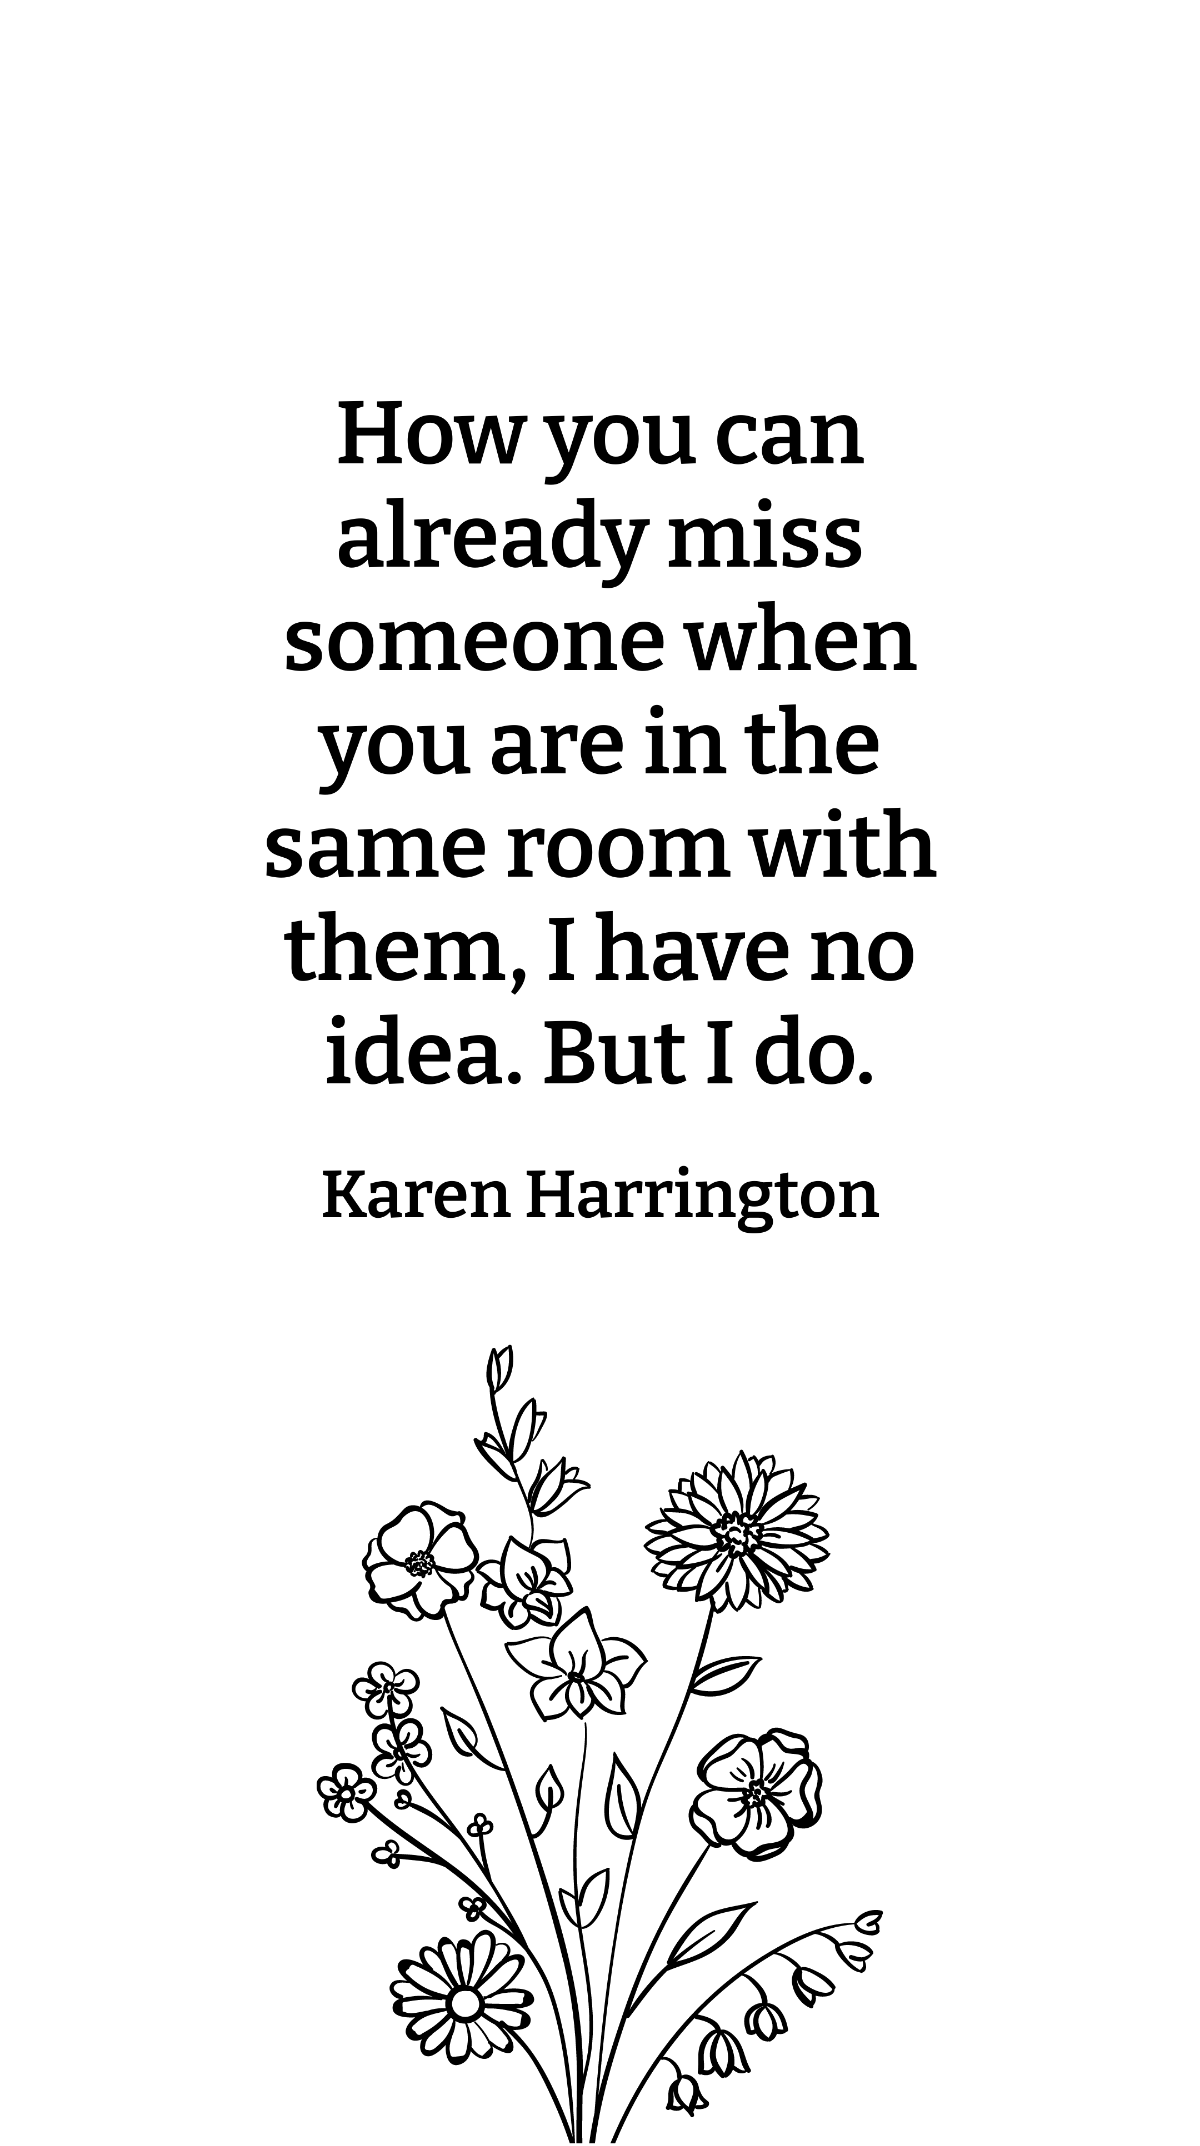 Karen Harrington - How you can already miss someone when you are in the same room with them, I have no idea. But I do.